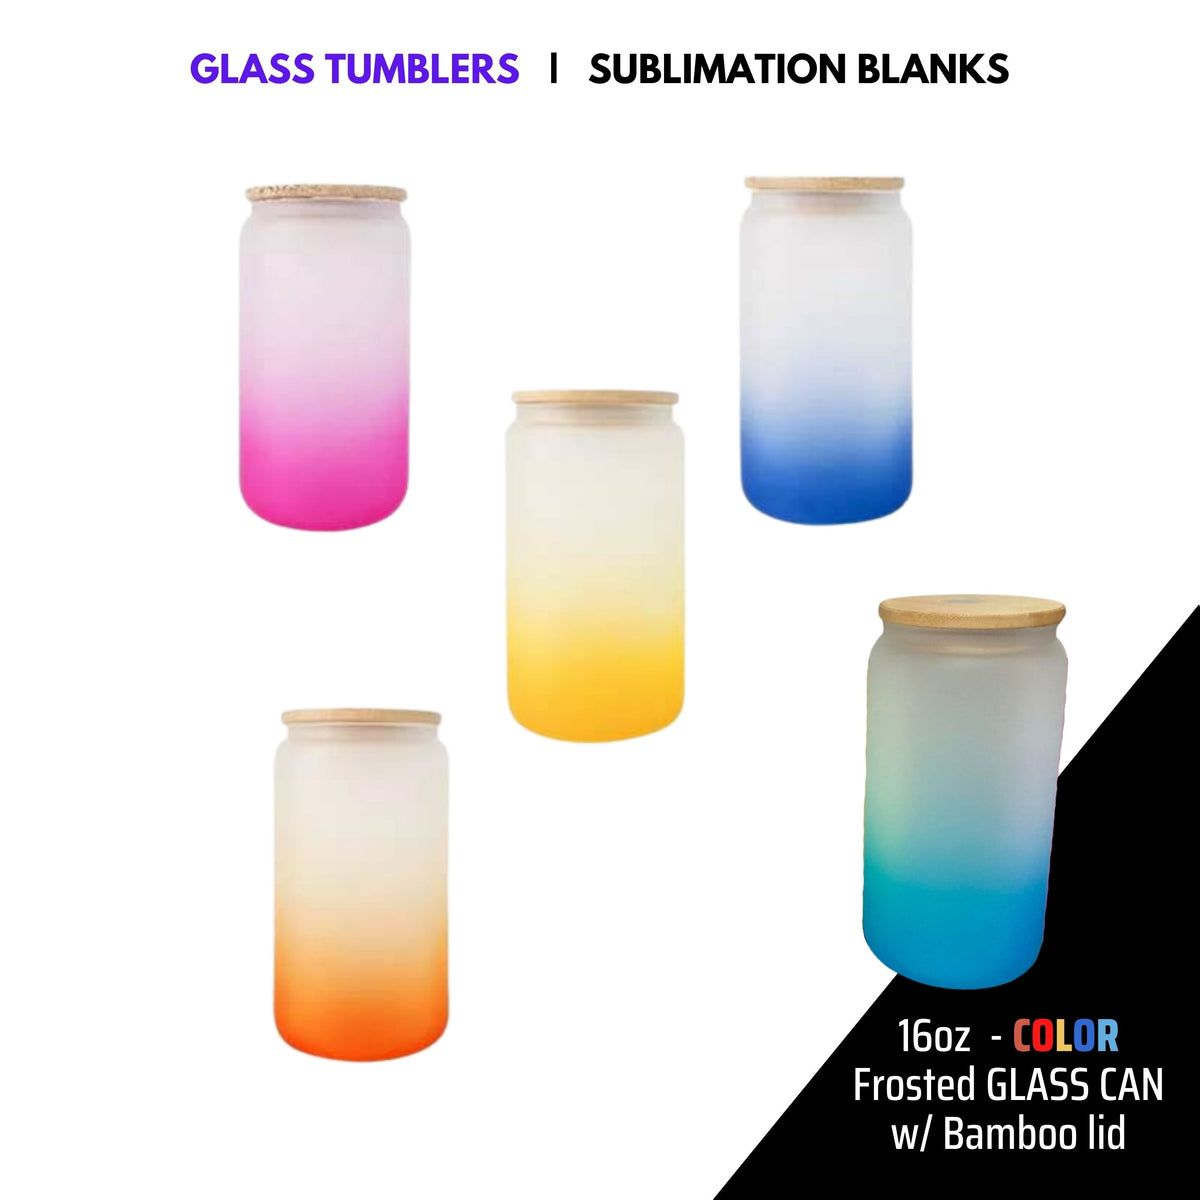 16oz Frosted Glass Tumbler-Sublimation